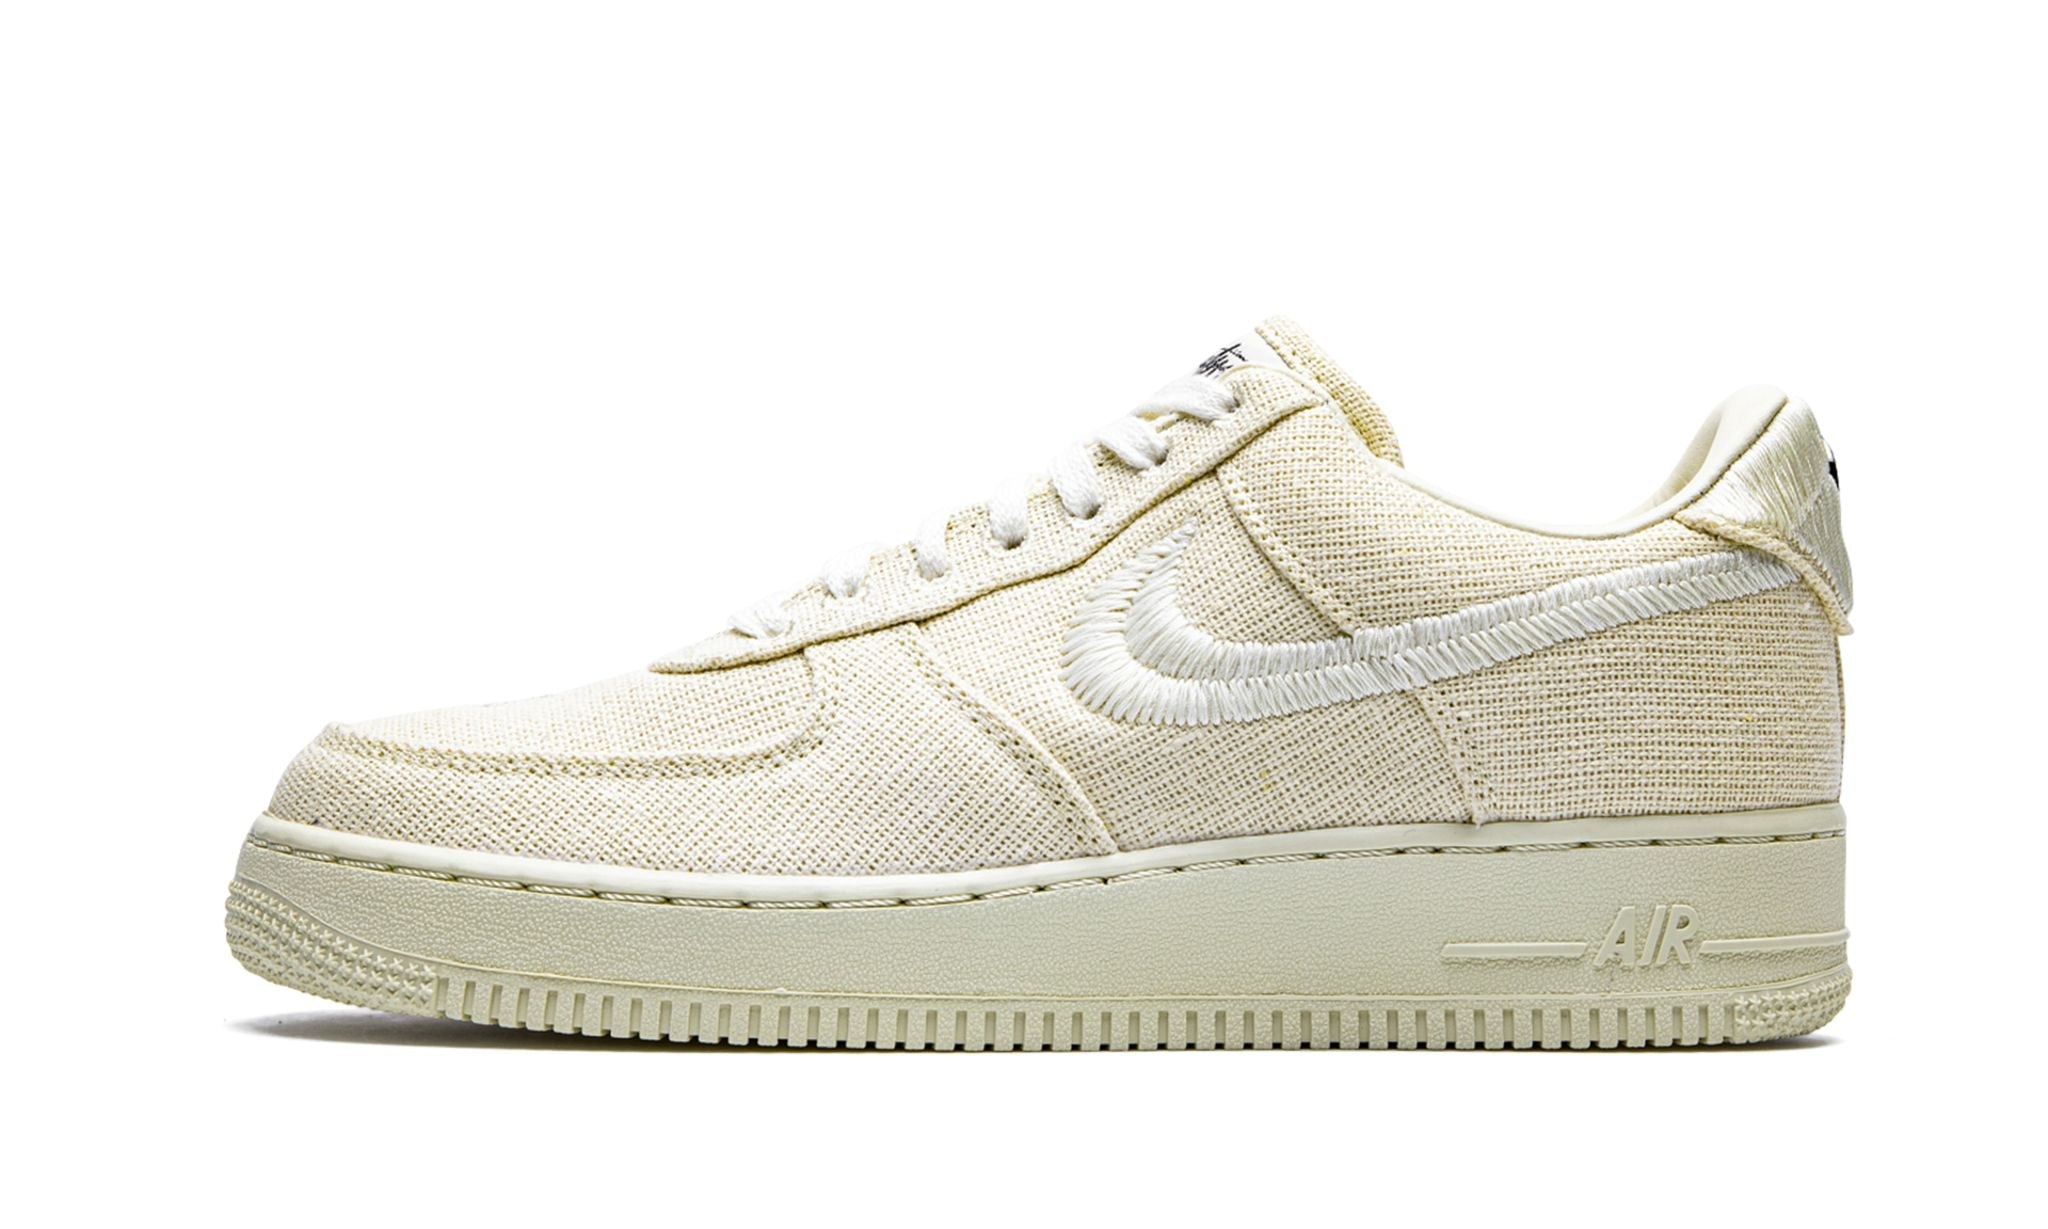 Nike Air Force 1 Low Stussy Fossil - Air Force 1 - Pirri